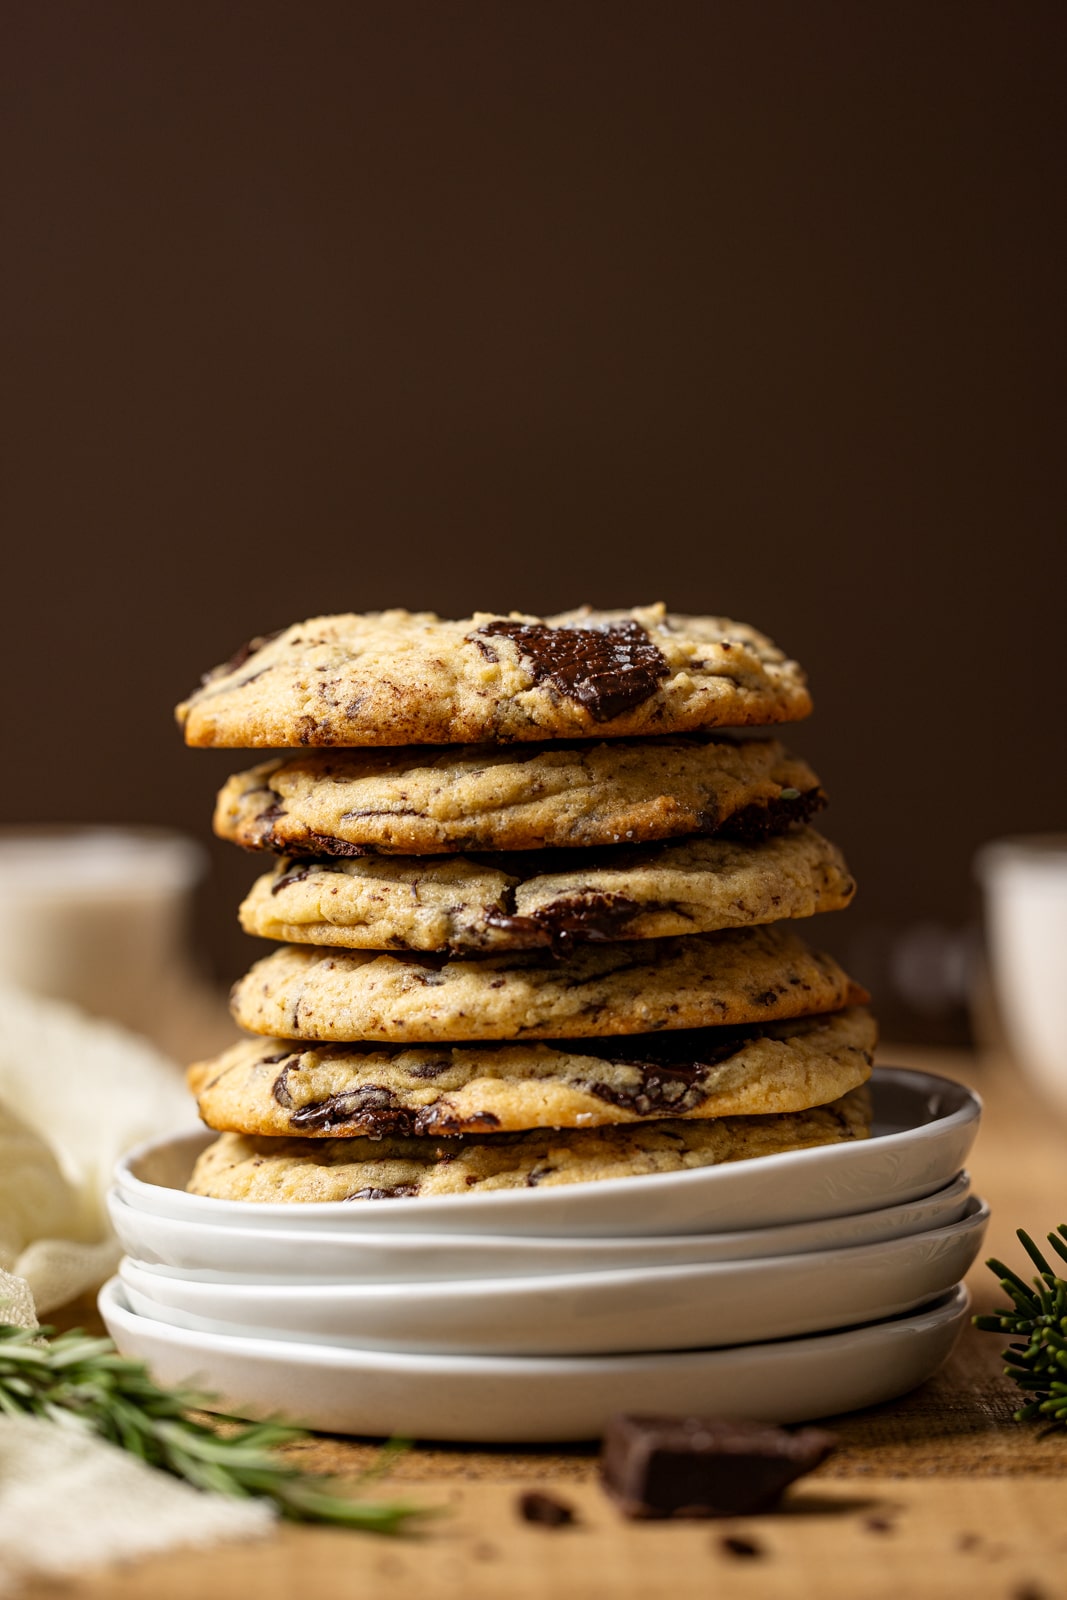 Stacks of cookies on stacks of plates.